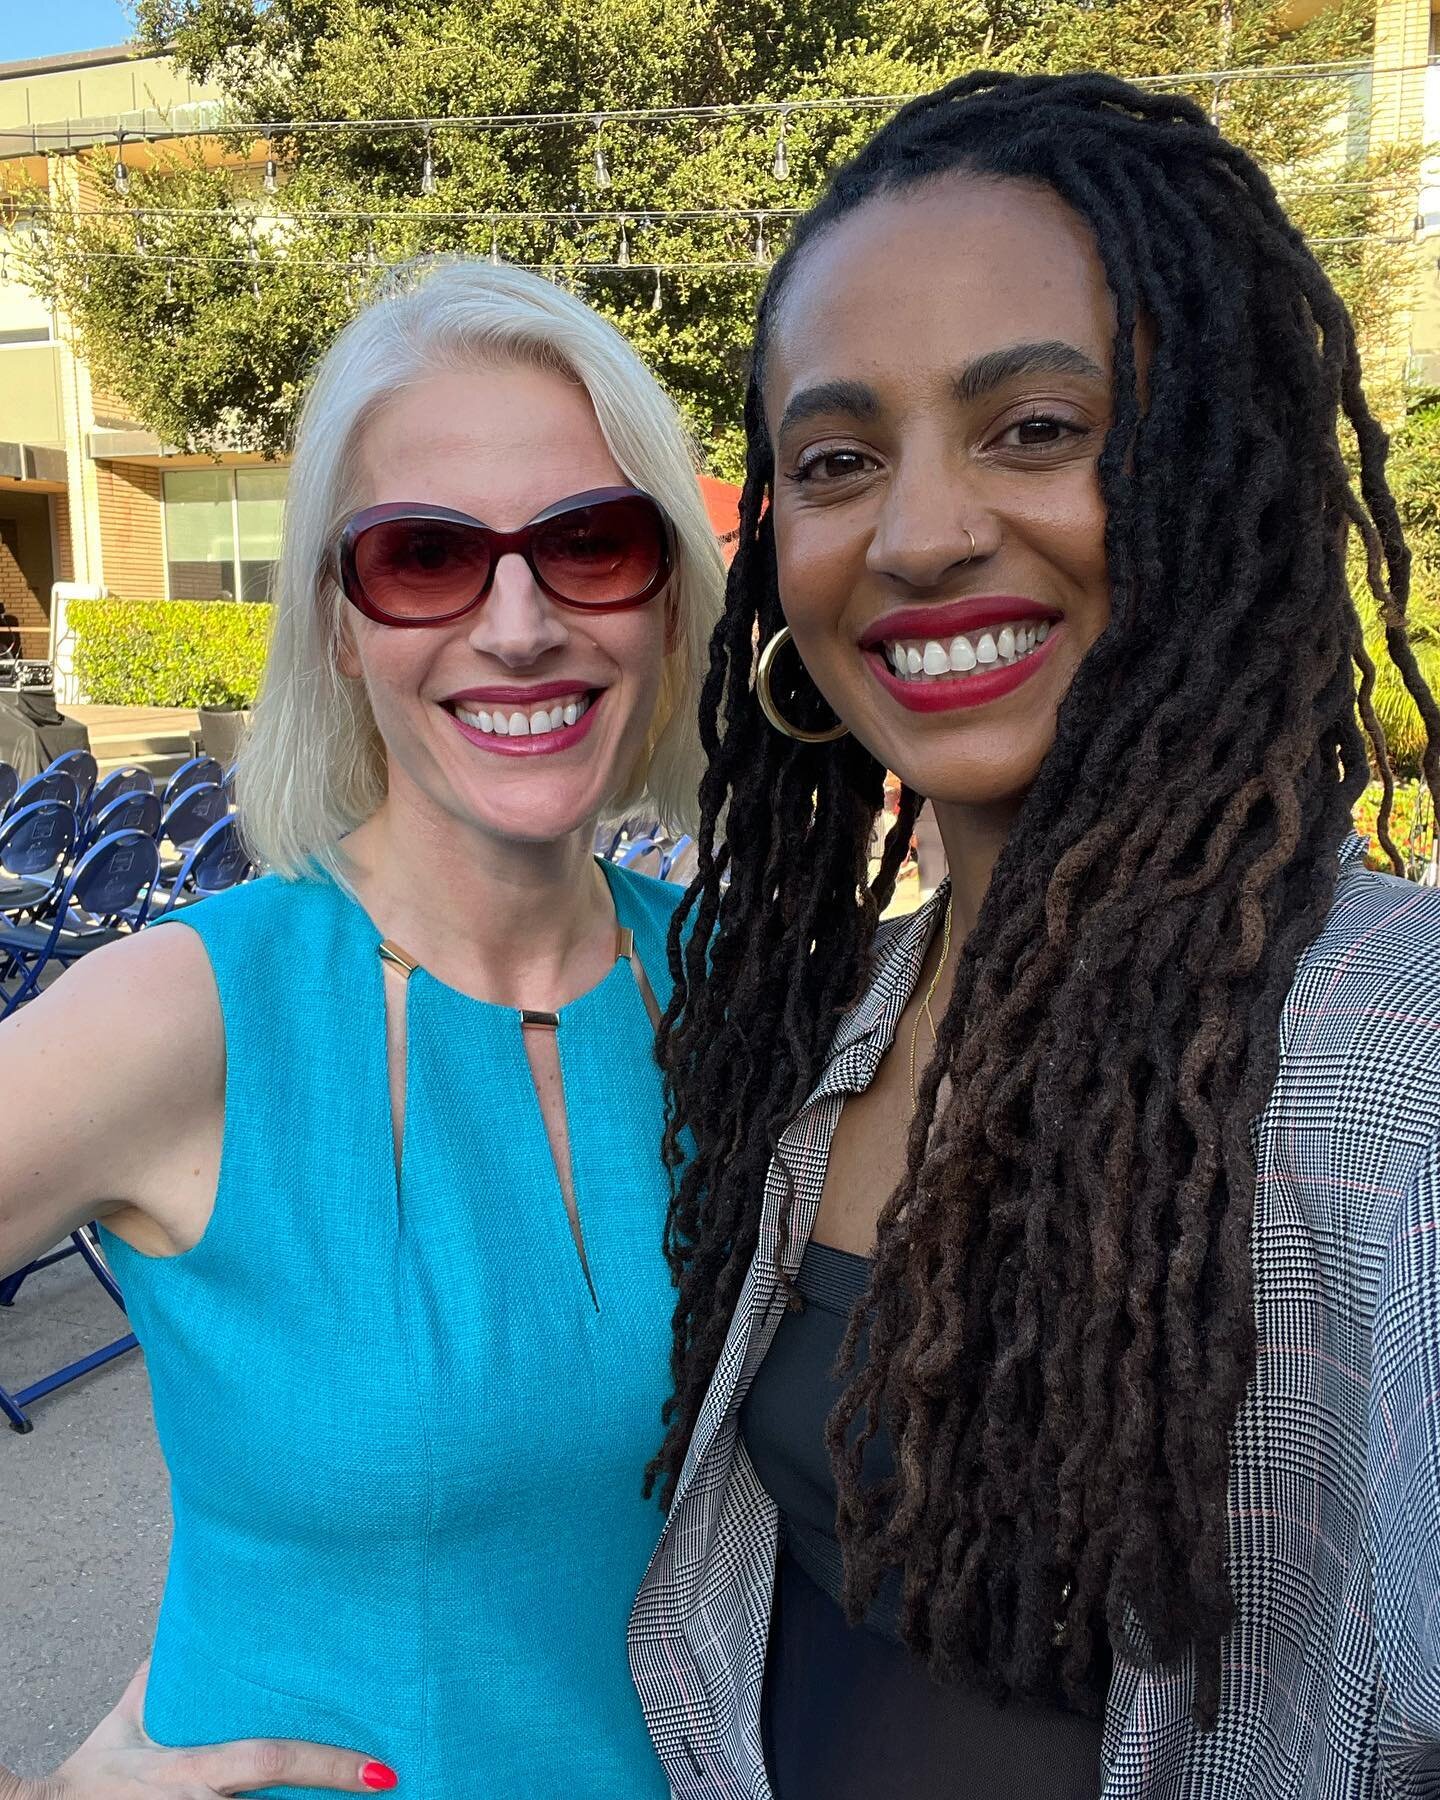 Last week, I had the opportunity to celebrate fifty years of Title IX at Mount Saint Mary's University with the Representation Project and so many amazing speakers including LA County Supervisor Holly J. Mitchell, First Partner Jennifer Siebel Newsom